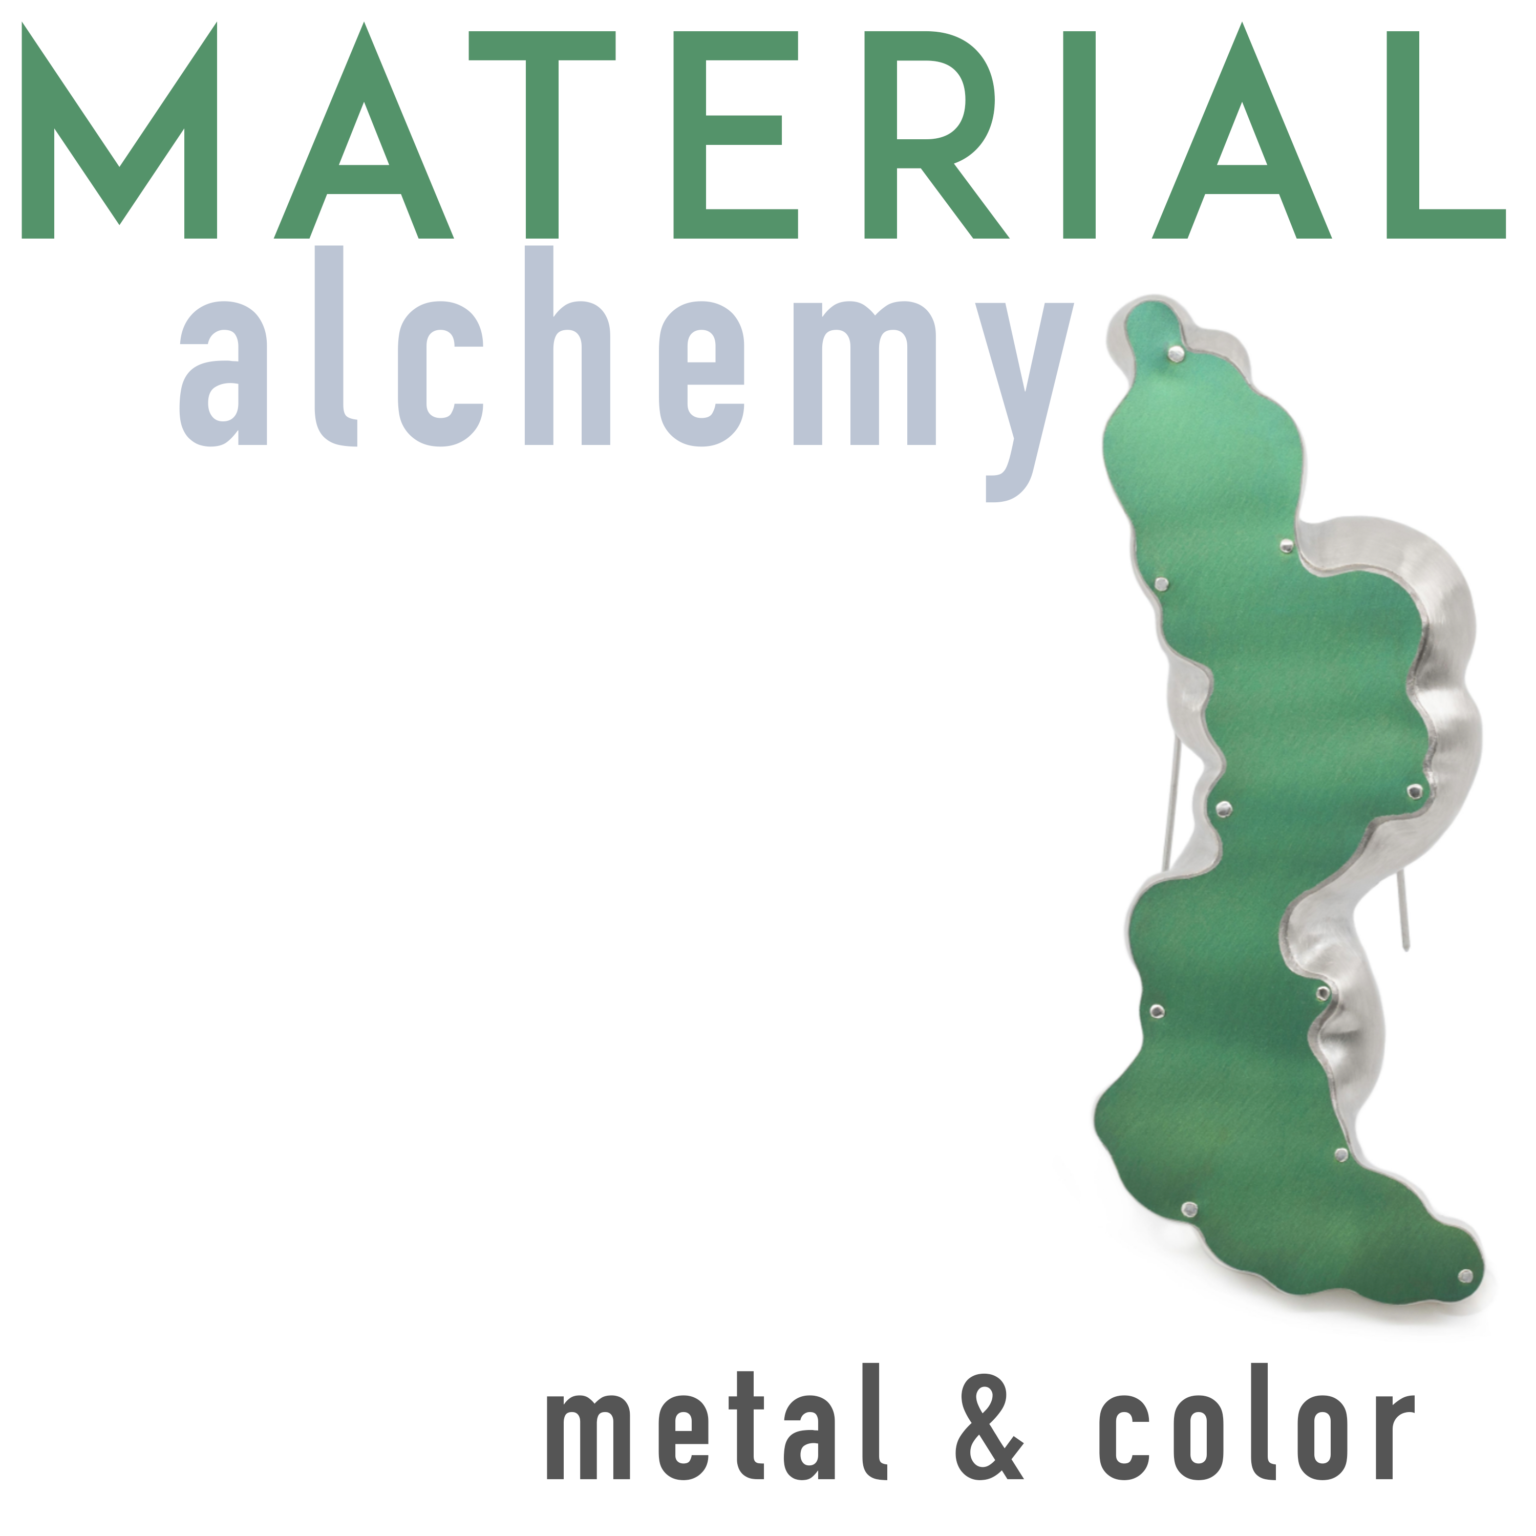 exhibition logo, green biomorphic vertical shape and text: material alchemy: metal & color